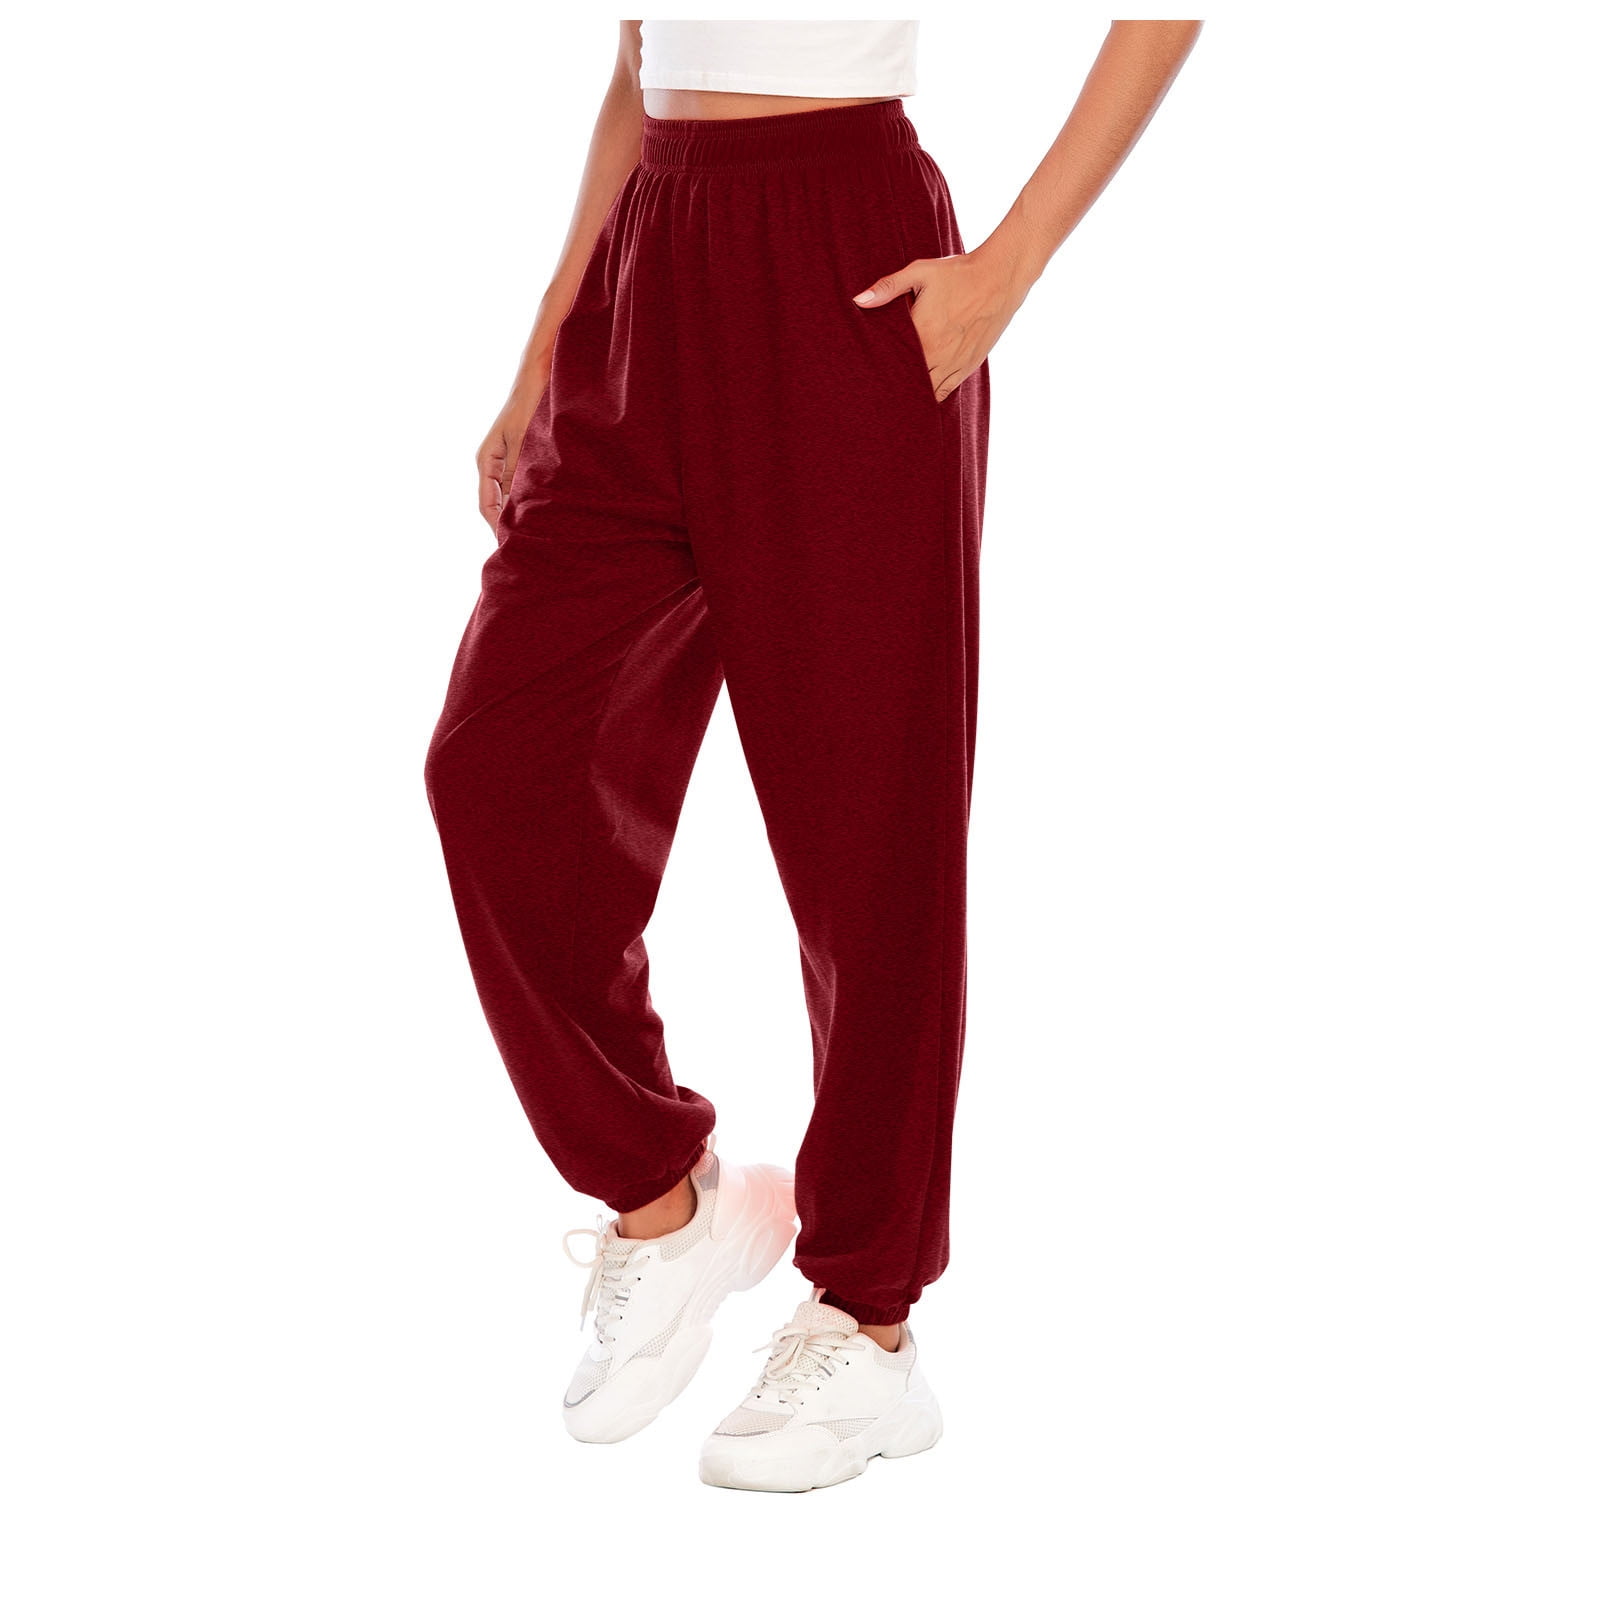 How to Wear Baggy Pants Again  Put This On